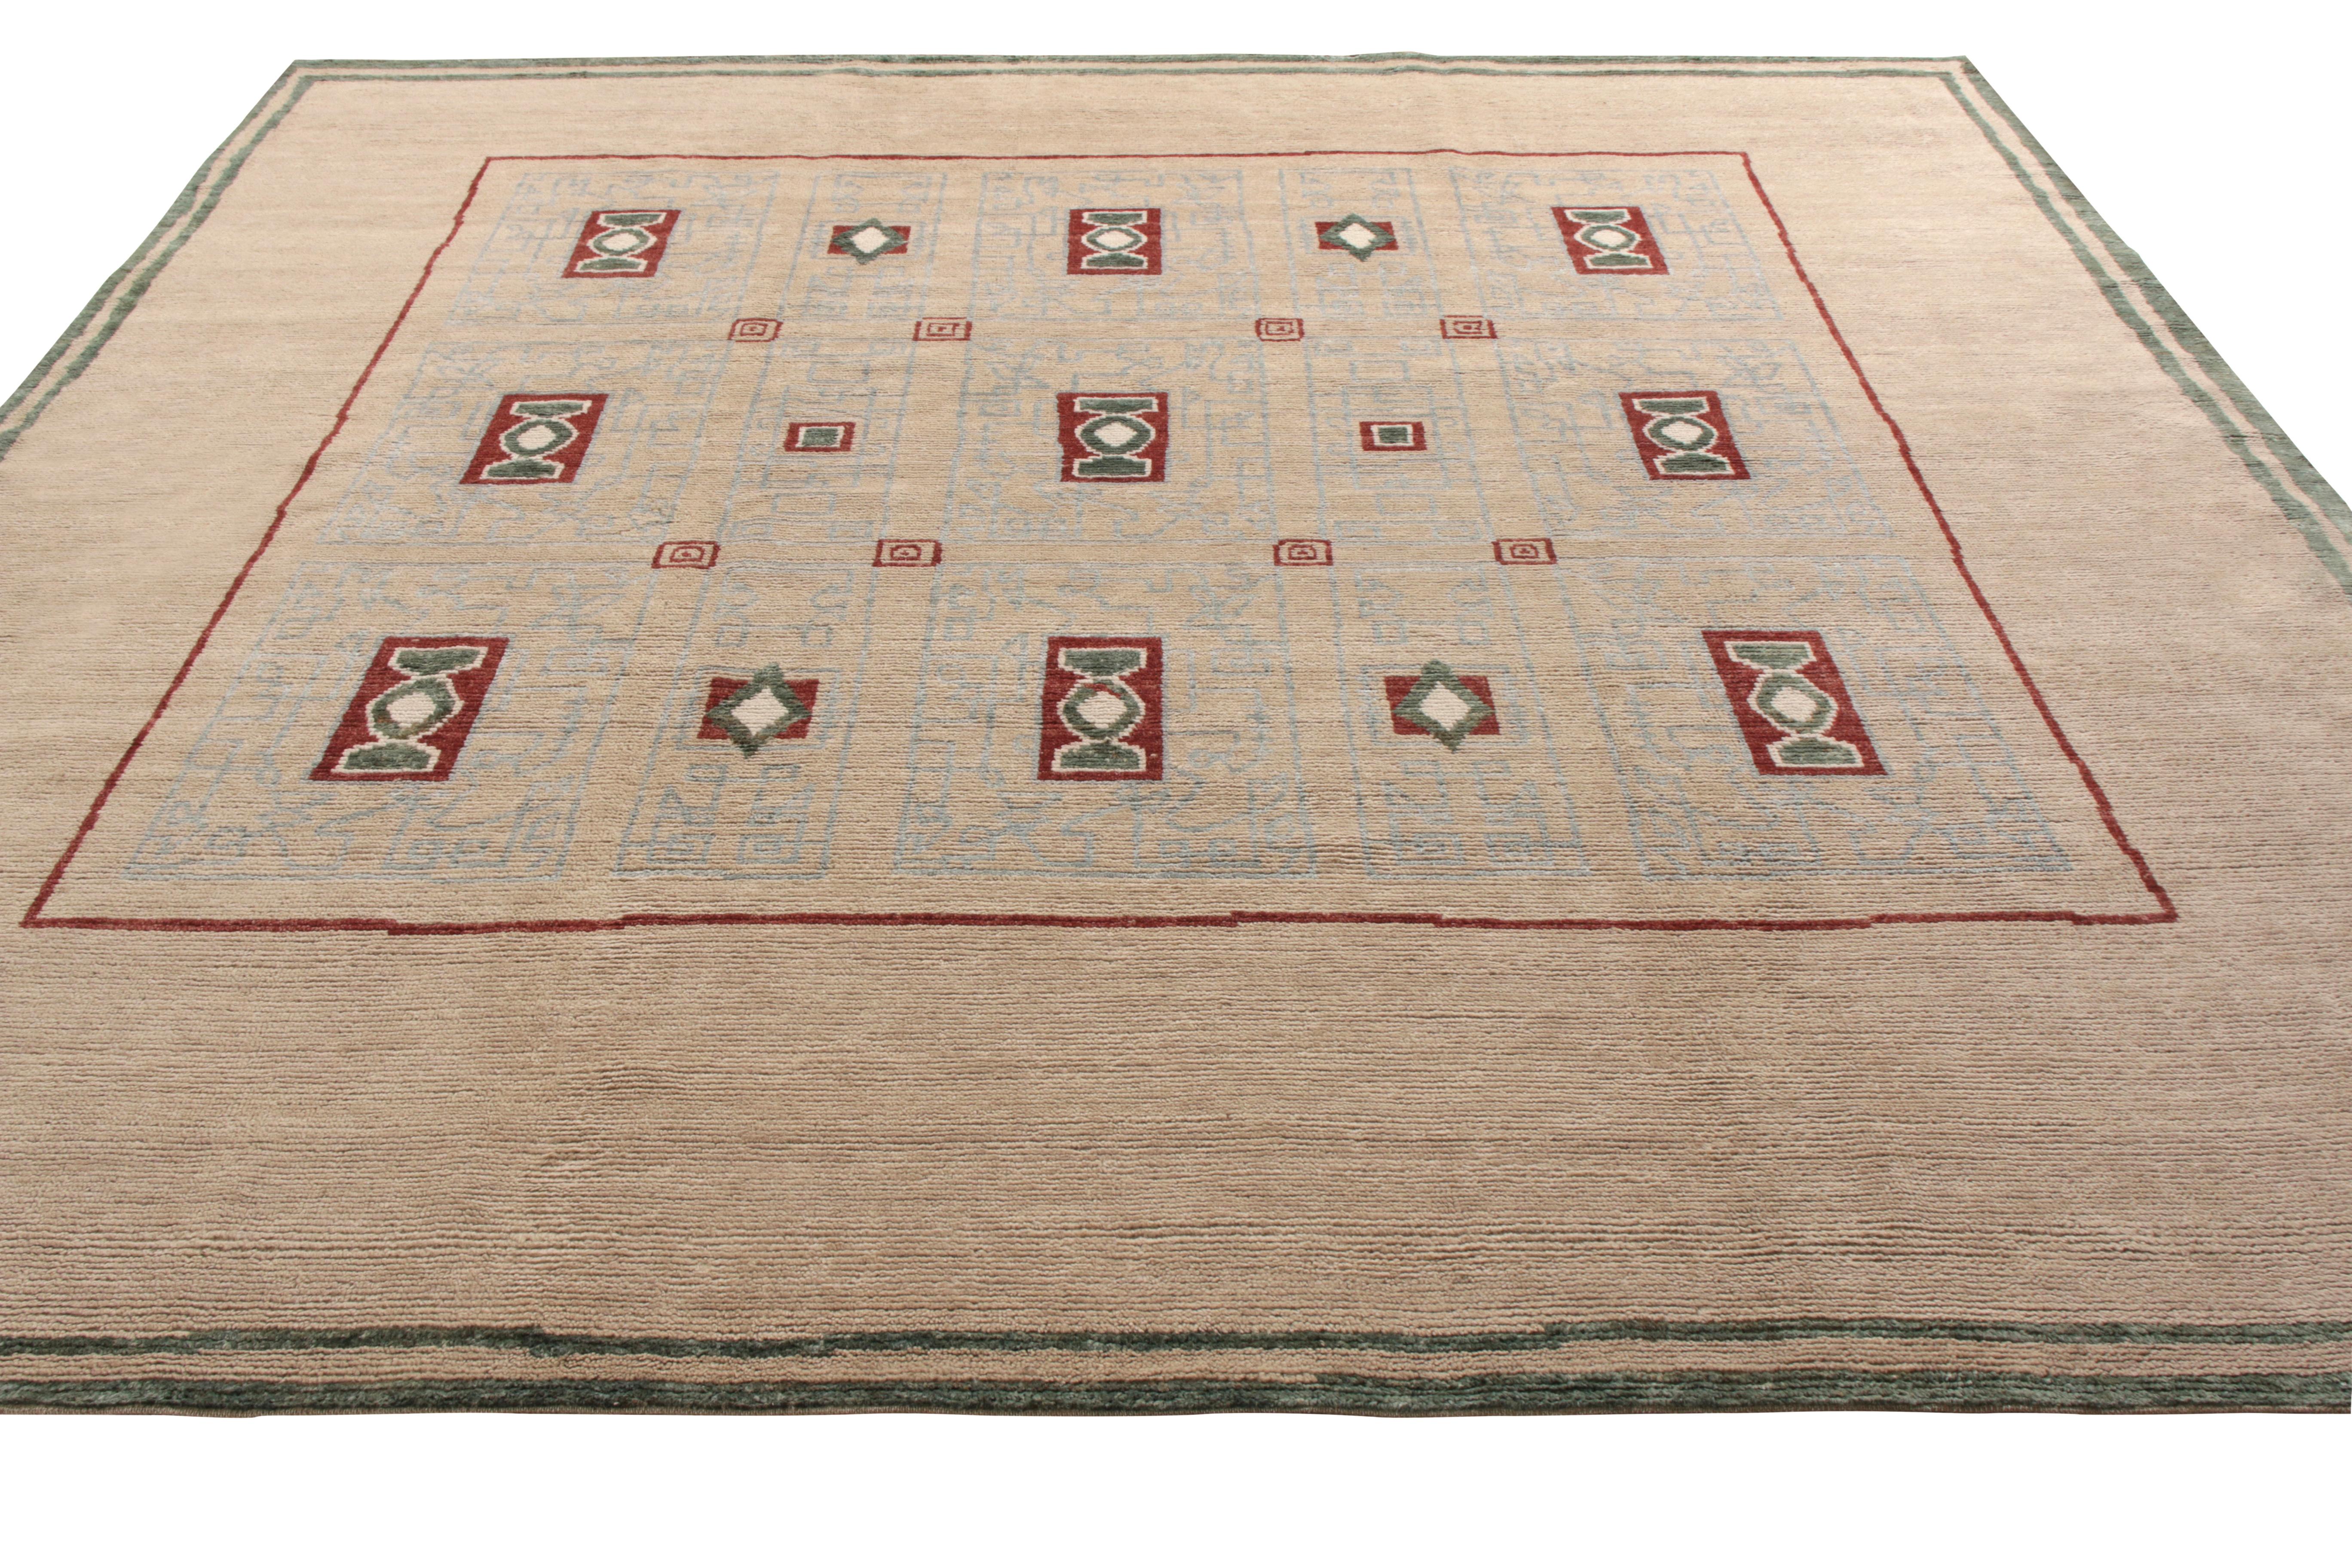 A 10 x 10 ode to French Art Deco rug styles, joining Rug & Kilim’s Deco Collection. Hand knotted in wool, enjoying a notes of green, red, and blue above soothing beige in a sophisticated array of medallion patterns. 

Further on the design: This